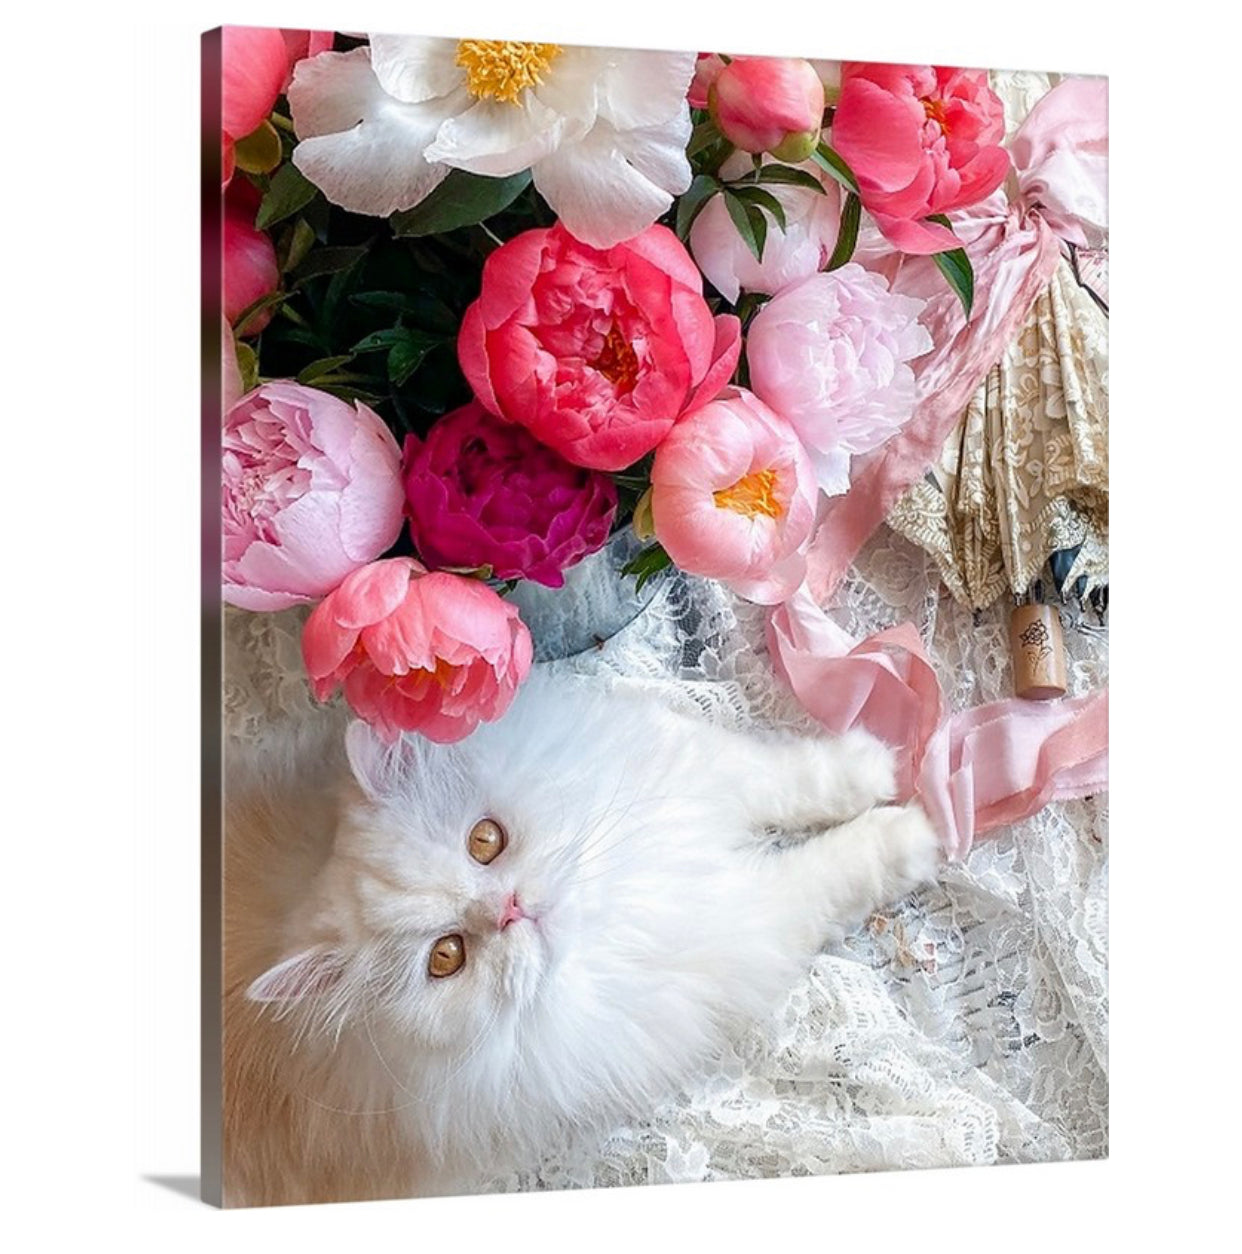 Kitty Cat in the Peonies Gallery Wrapped Canvas